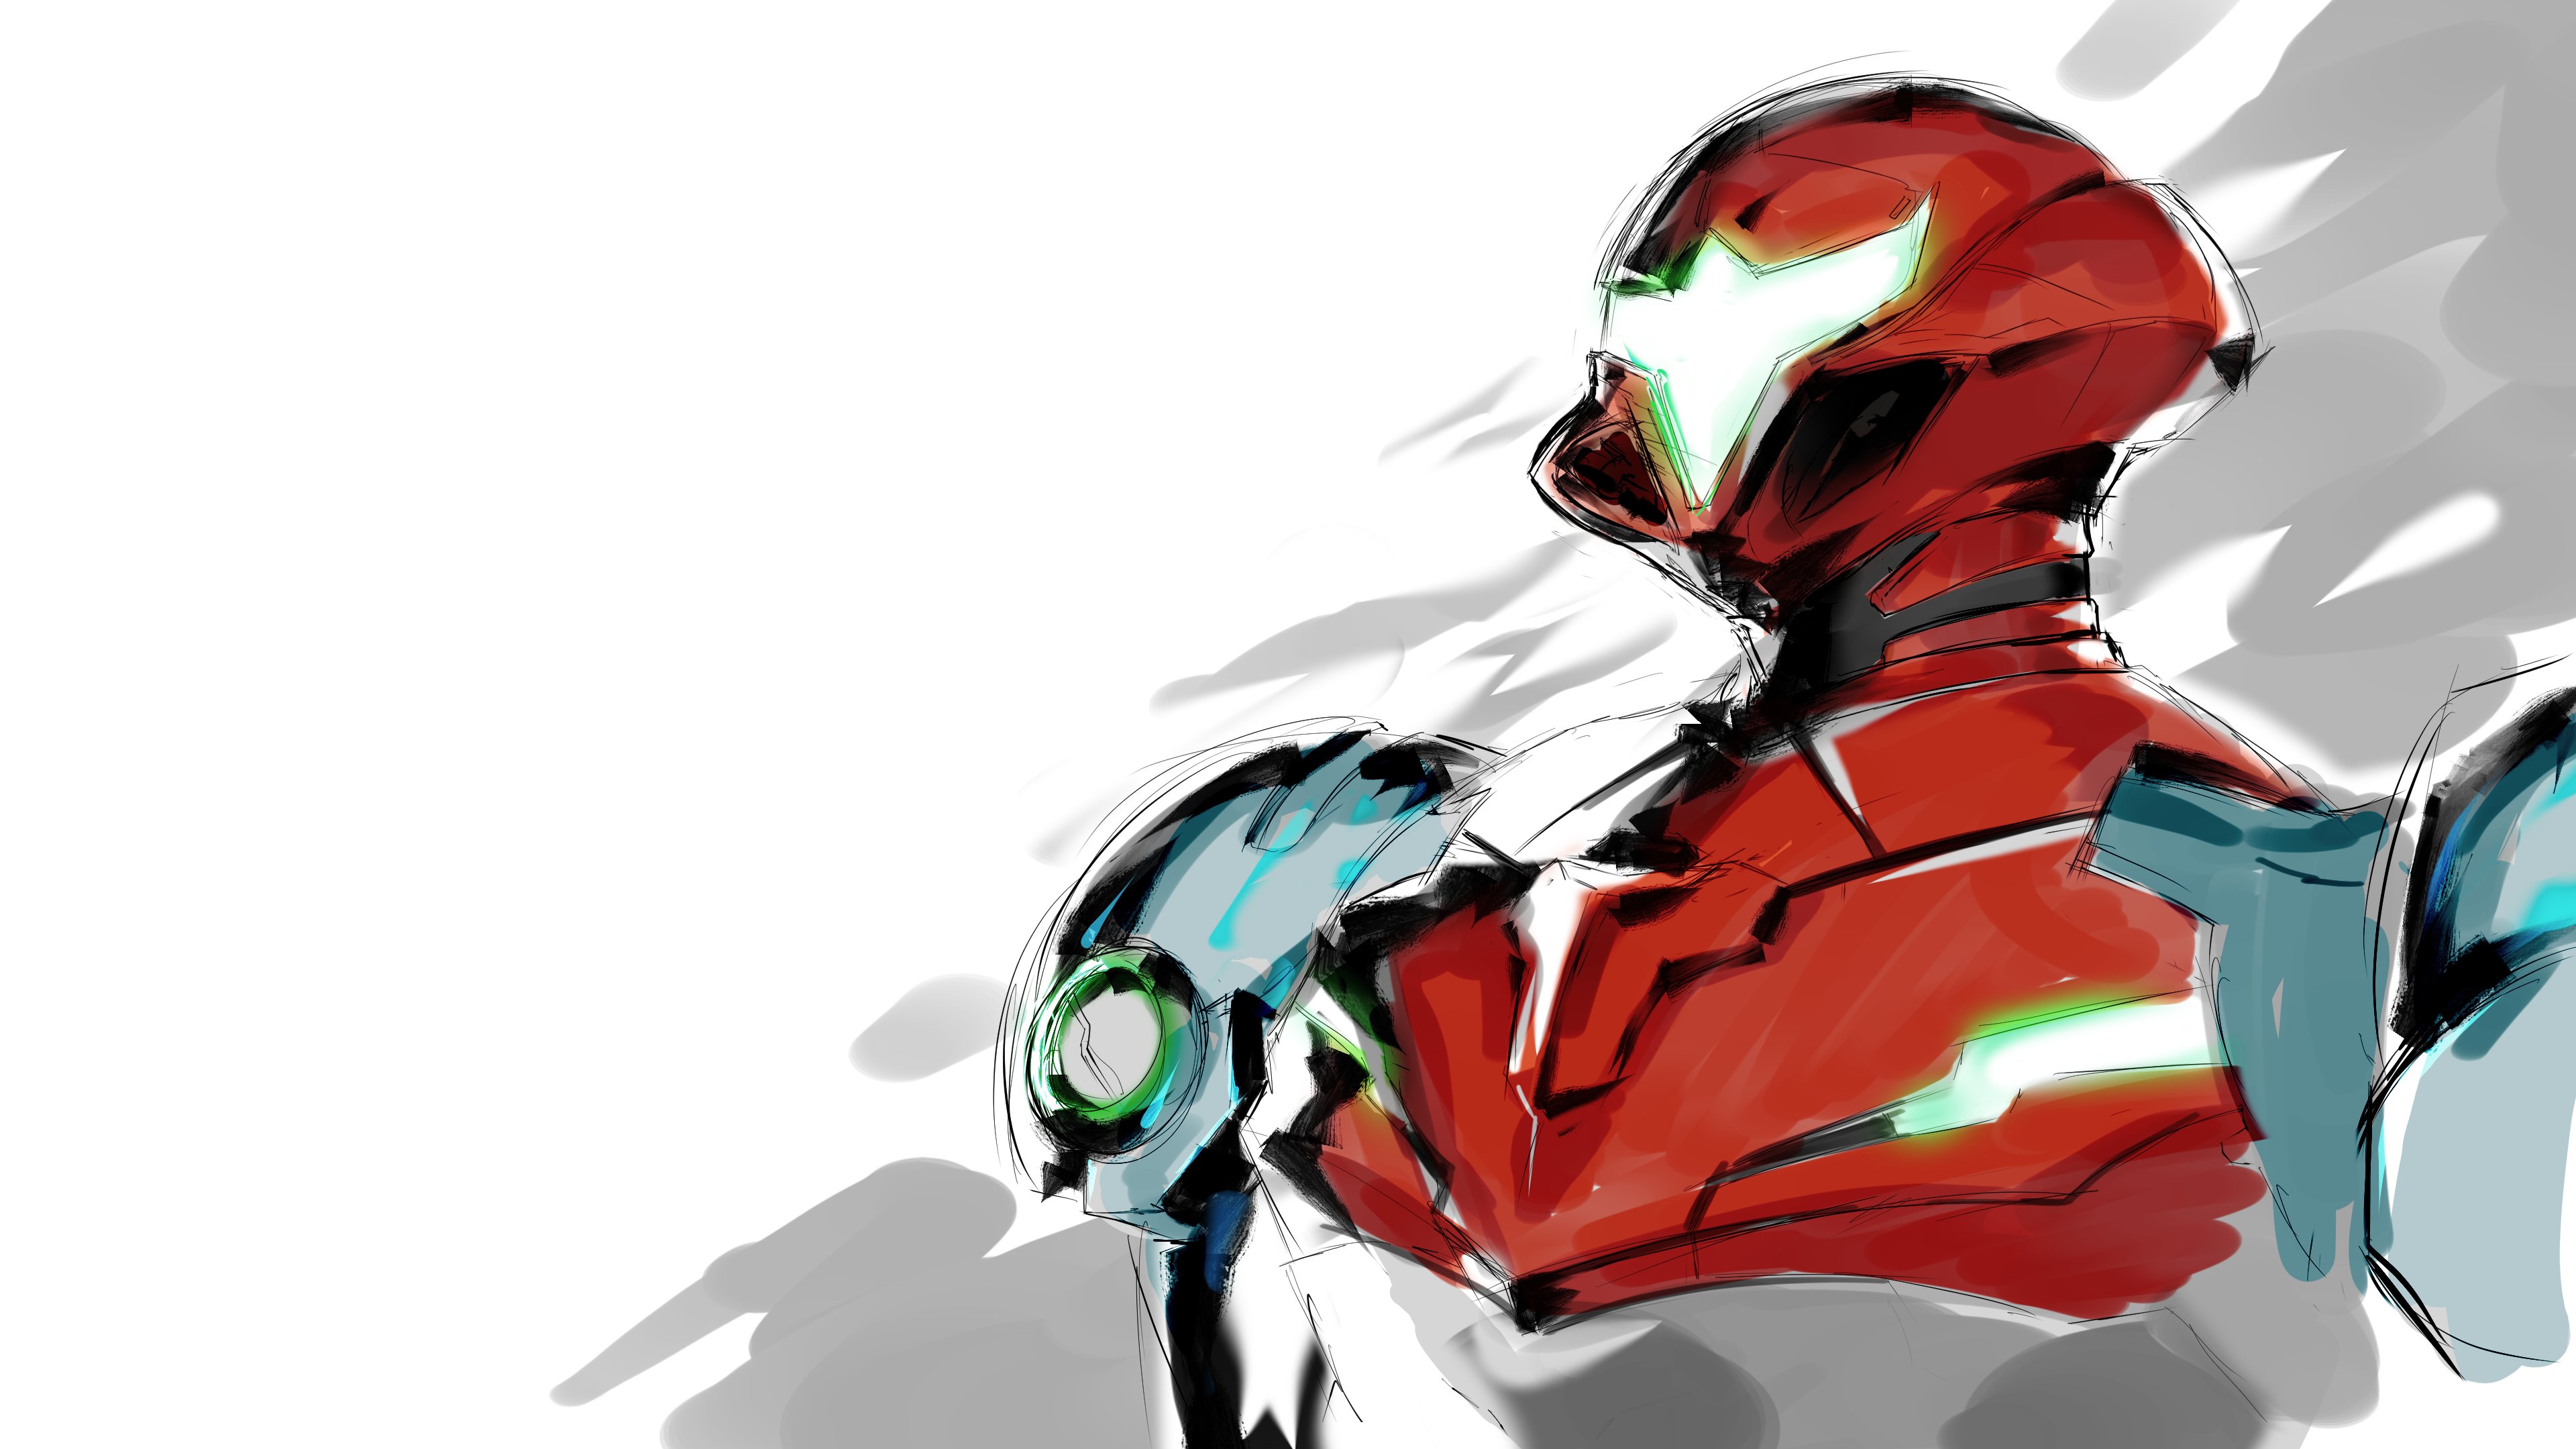 Quick sketch because Metroid Dread